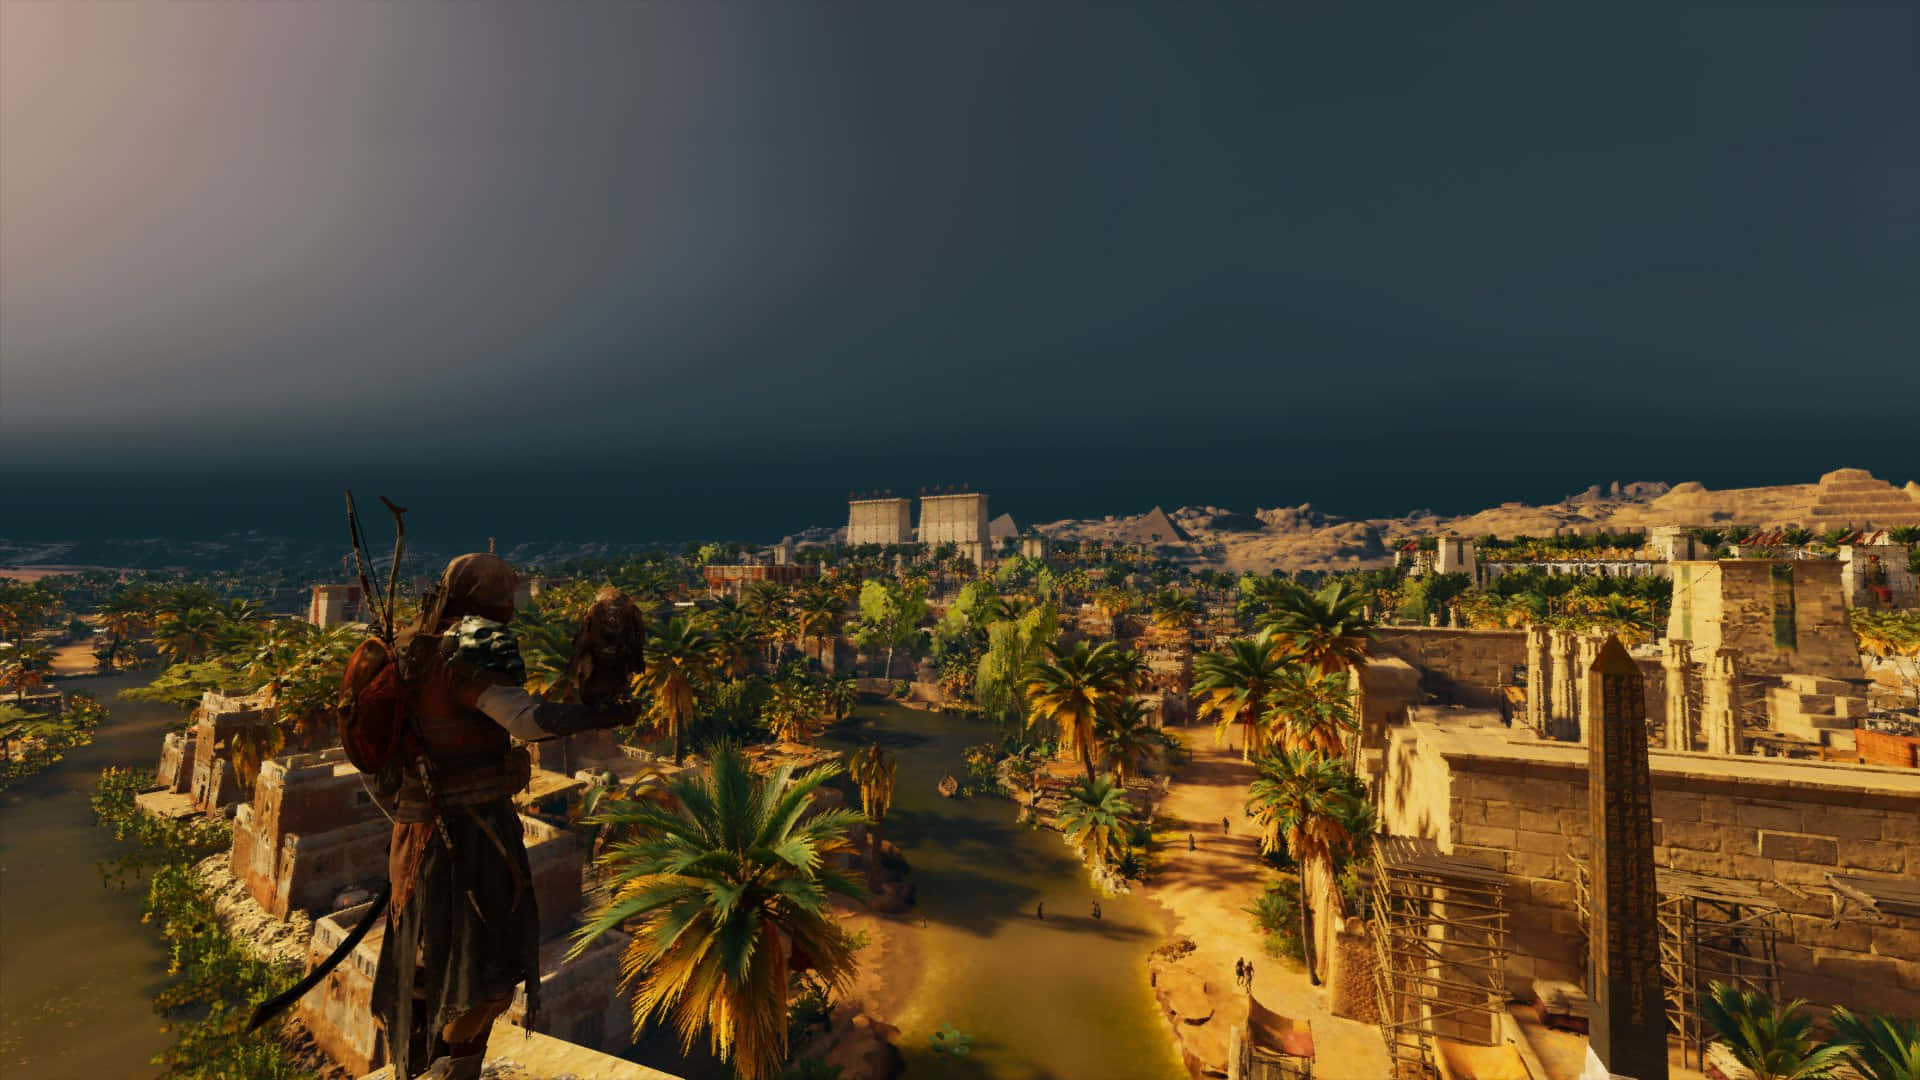 Bayek, Thebes Egypt 1920x1080 Assassin's Creed Origins Background